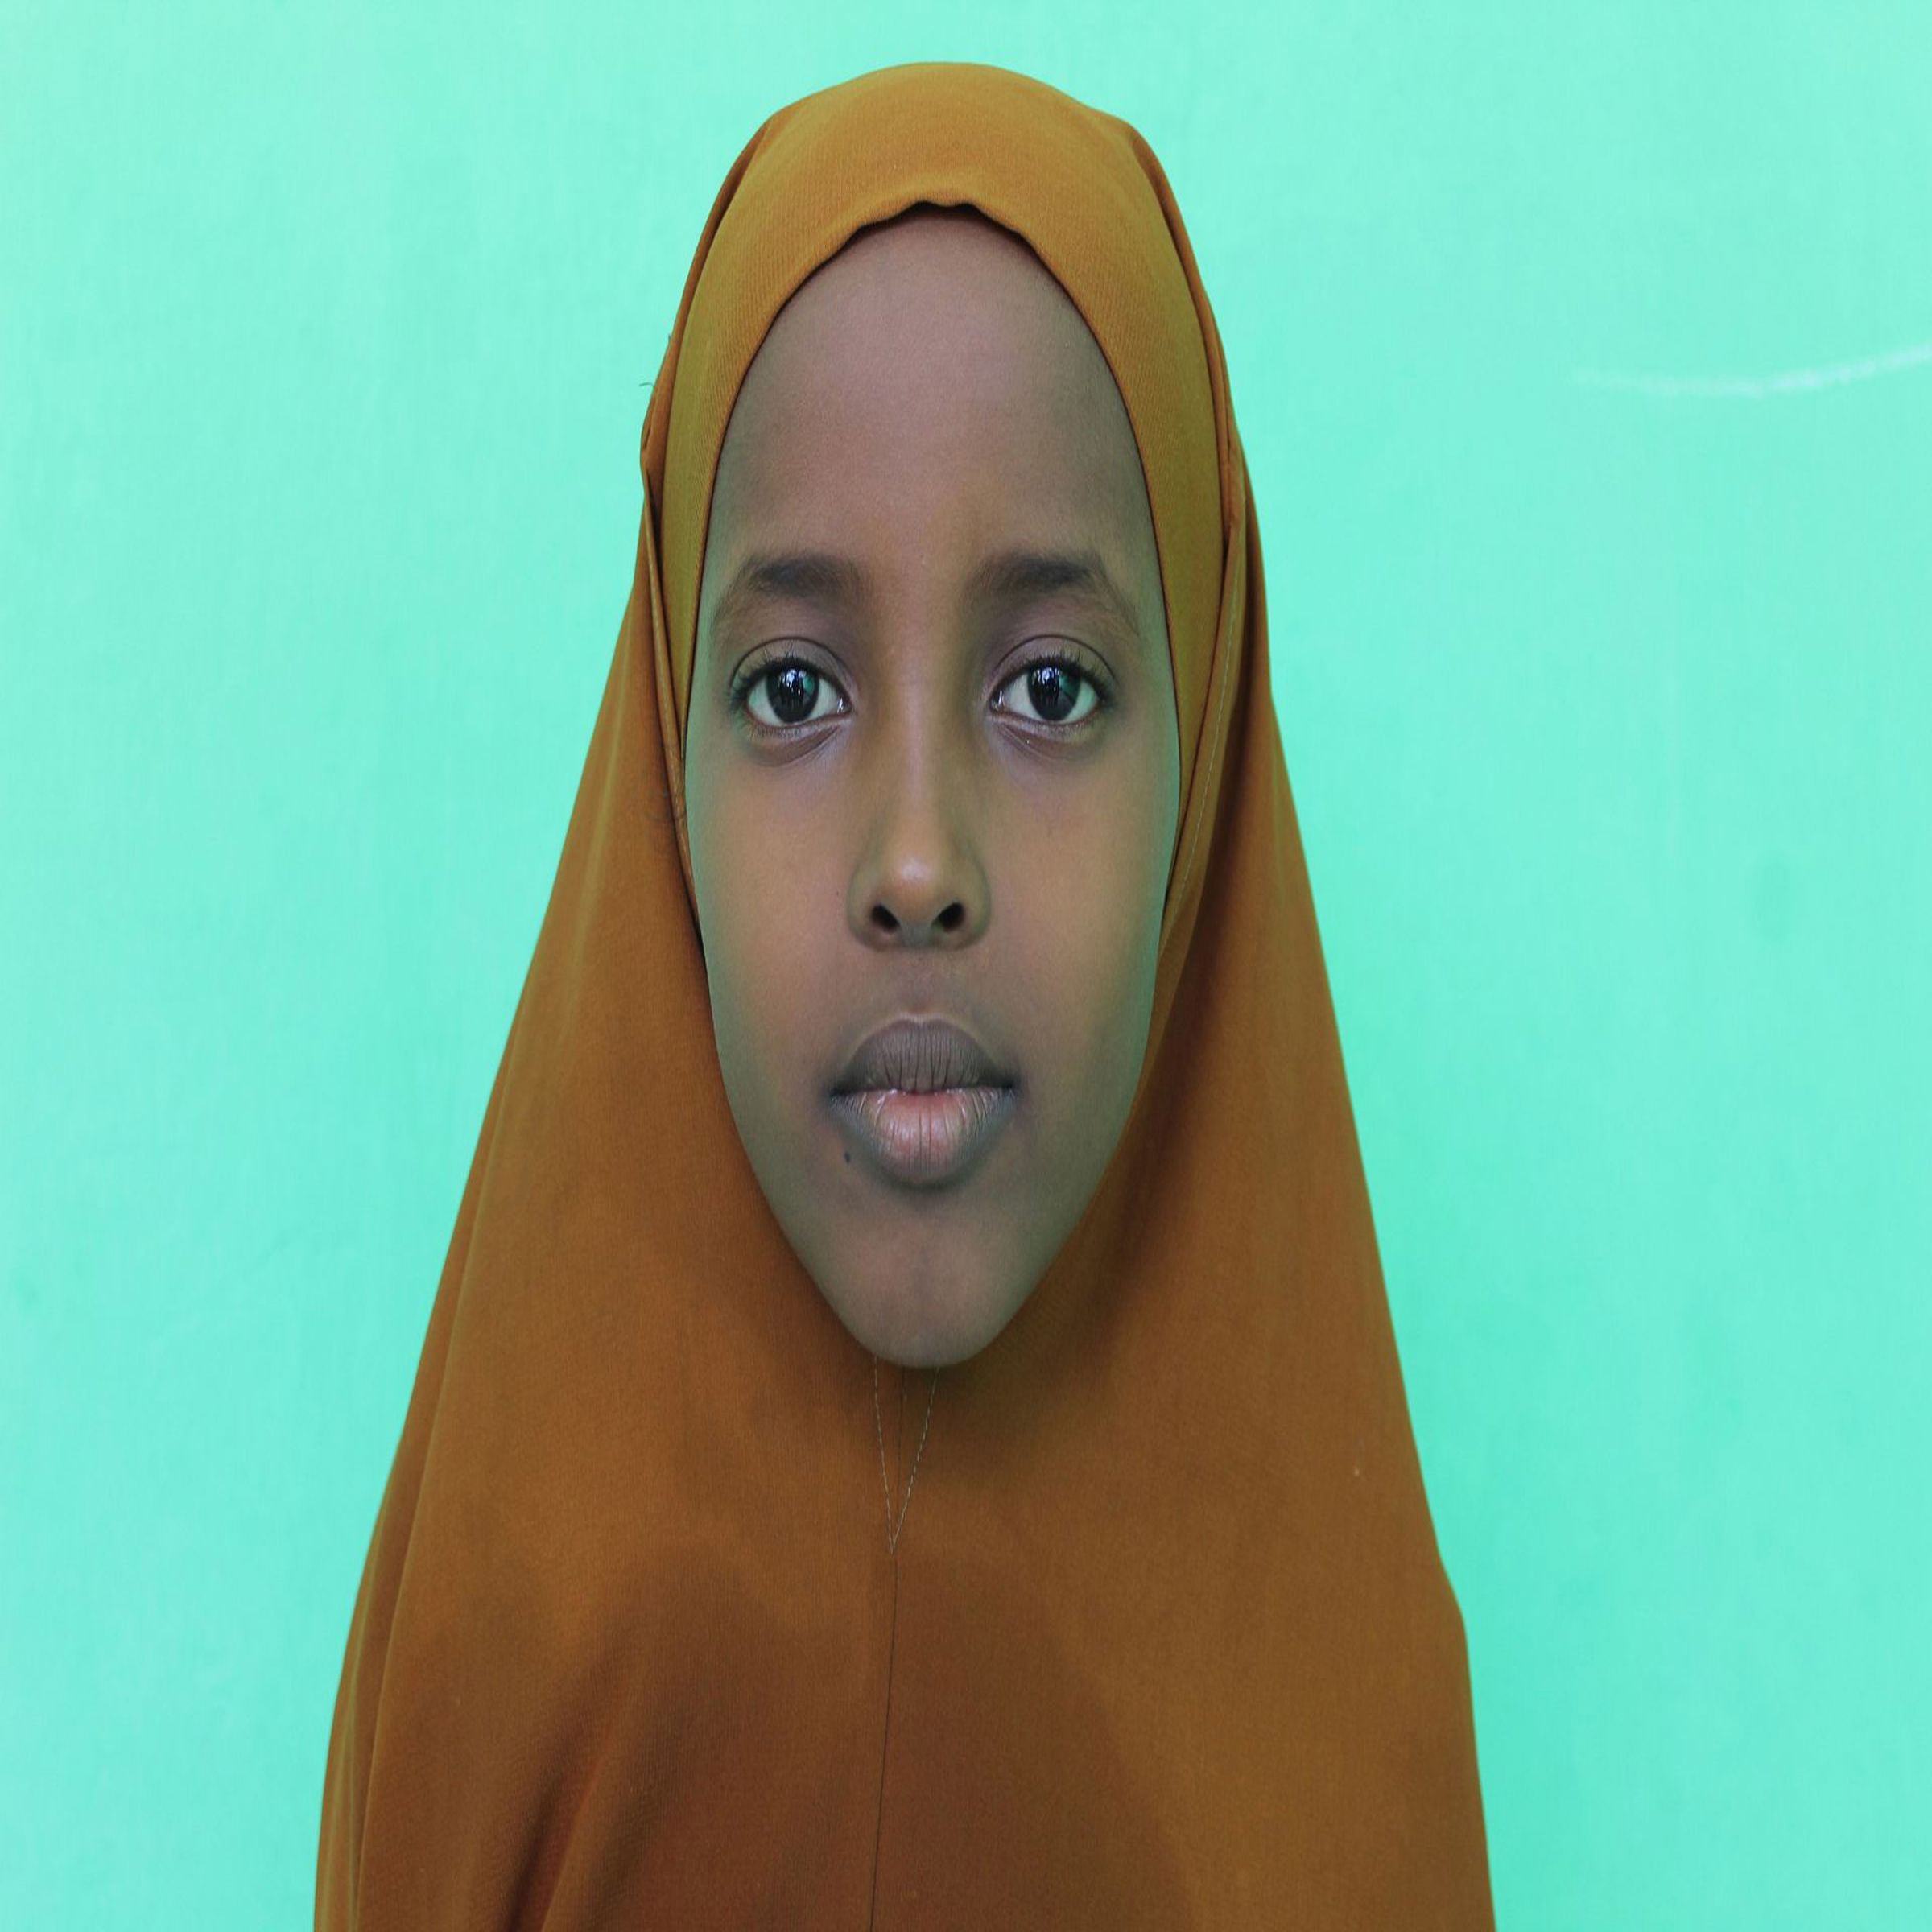 Human Appeal Orphan - Ayan Mohamed